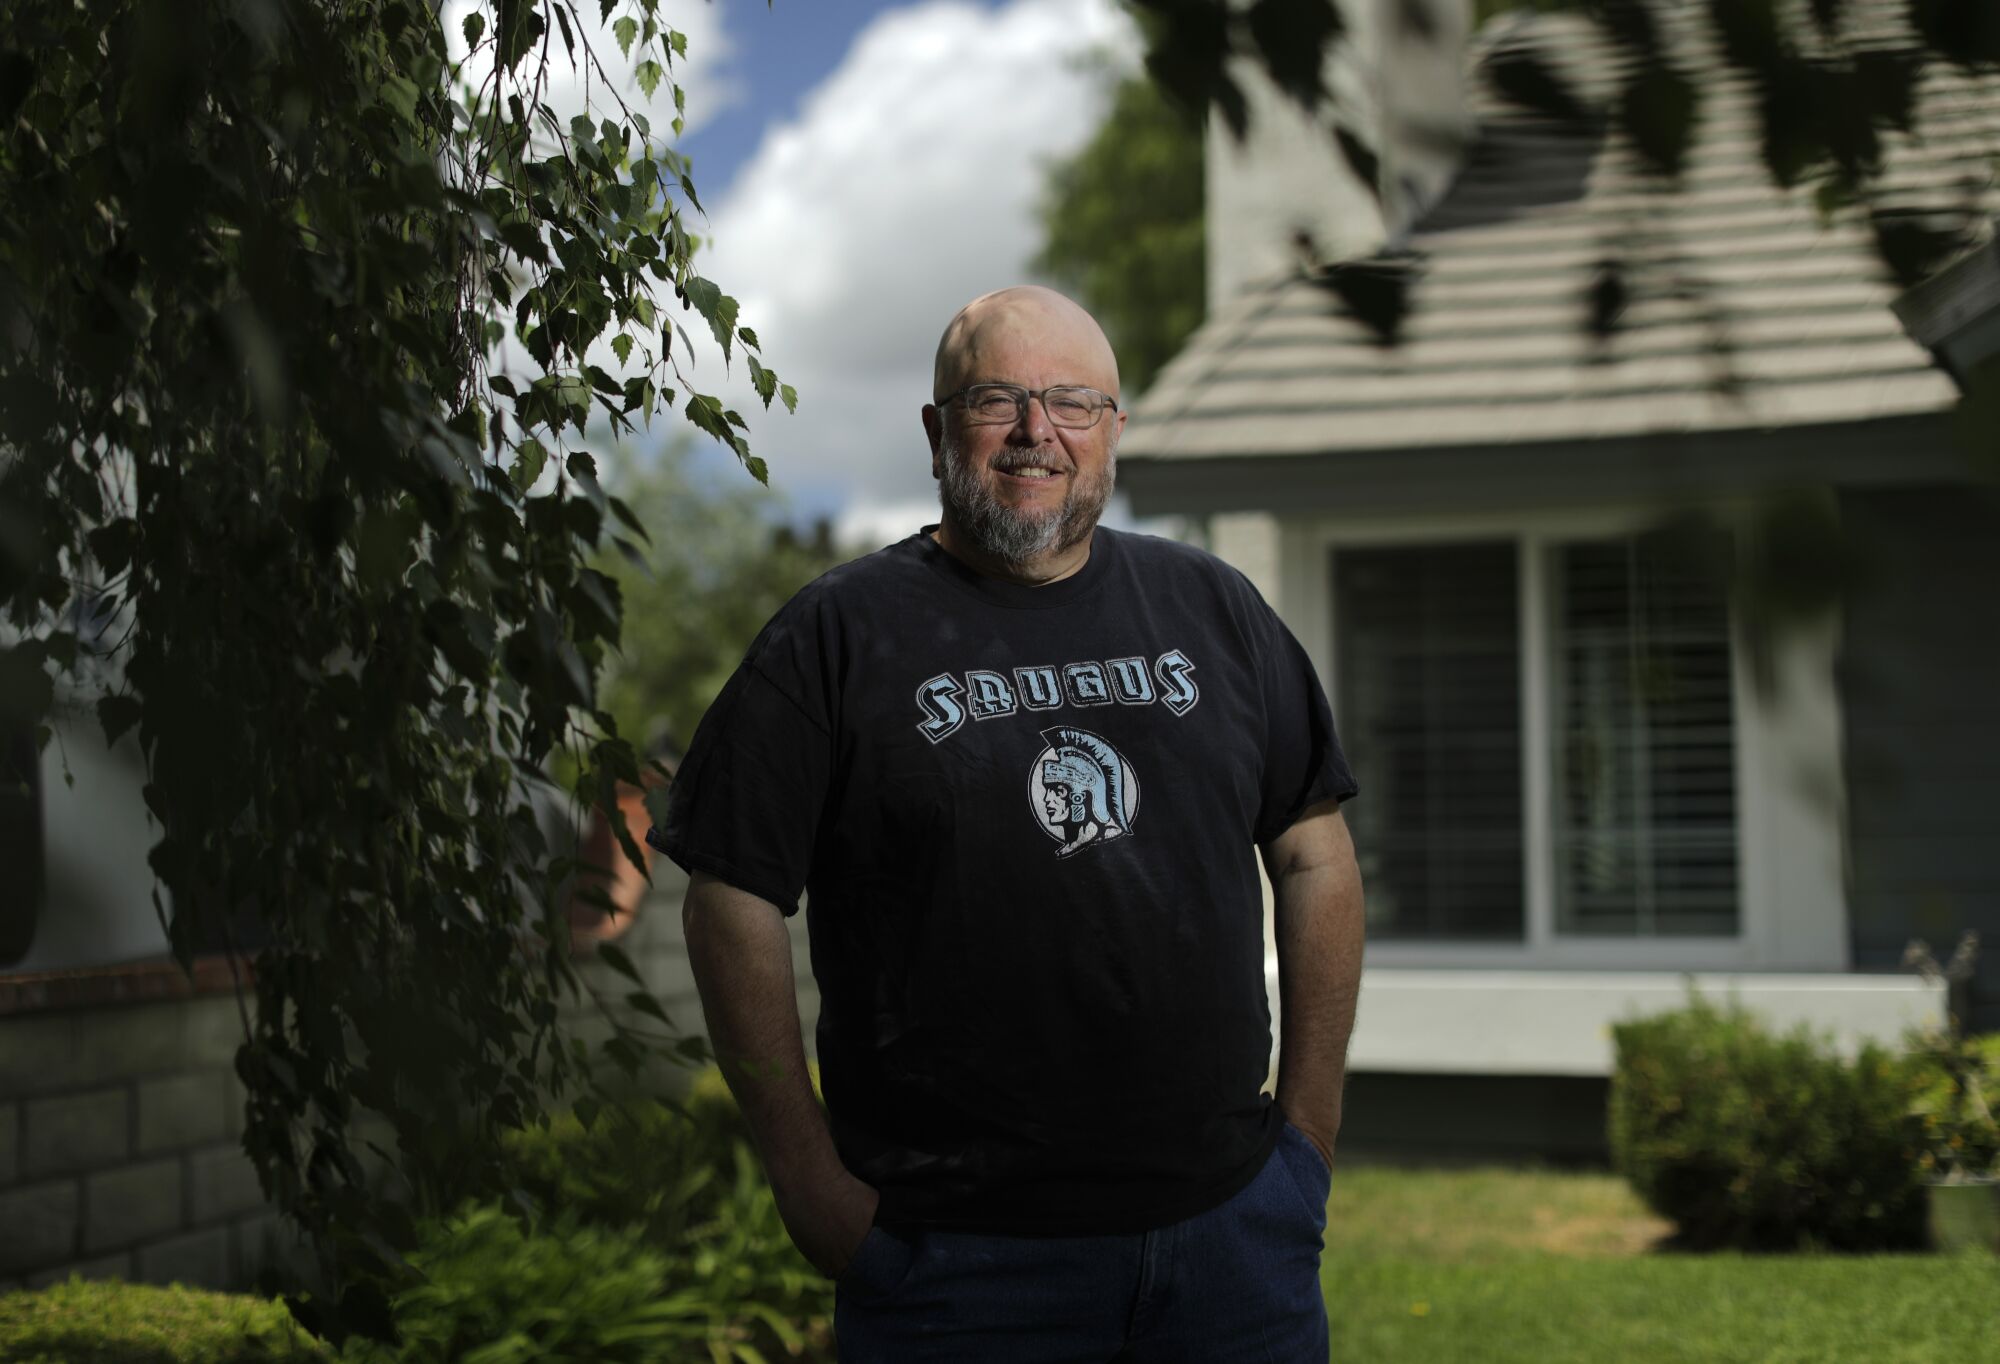 In nearly 30 years of teaching, Adam Bratt had guided students through the days after 9/11, earthquakes and fires. All those tragedies had hit close to home, he said, but the Saugus shooting hit home.